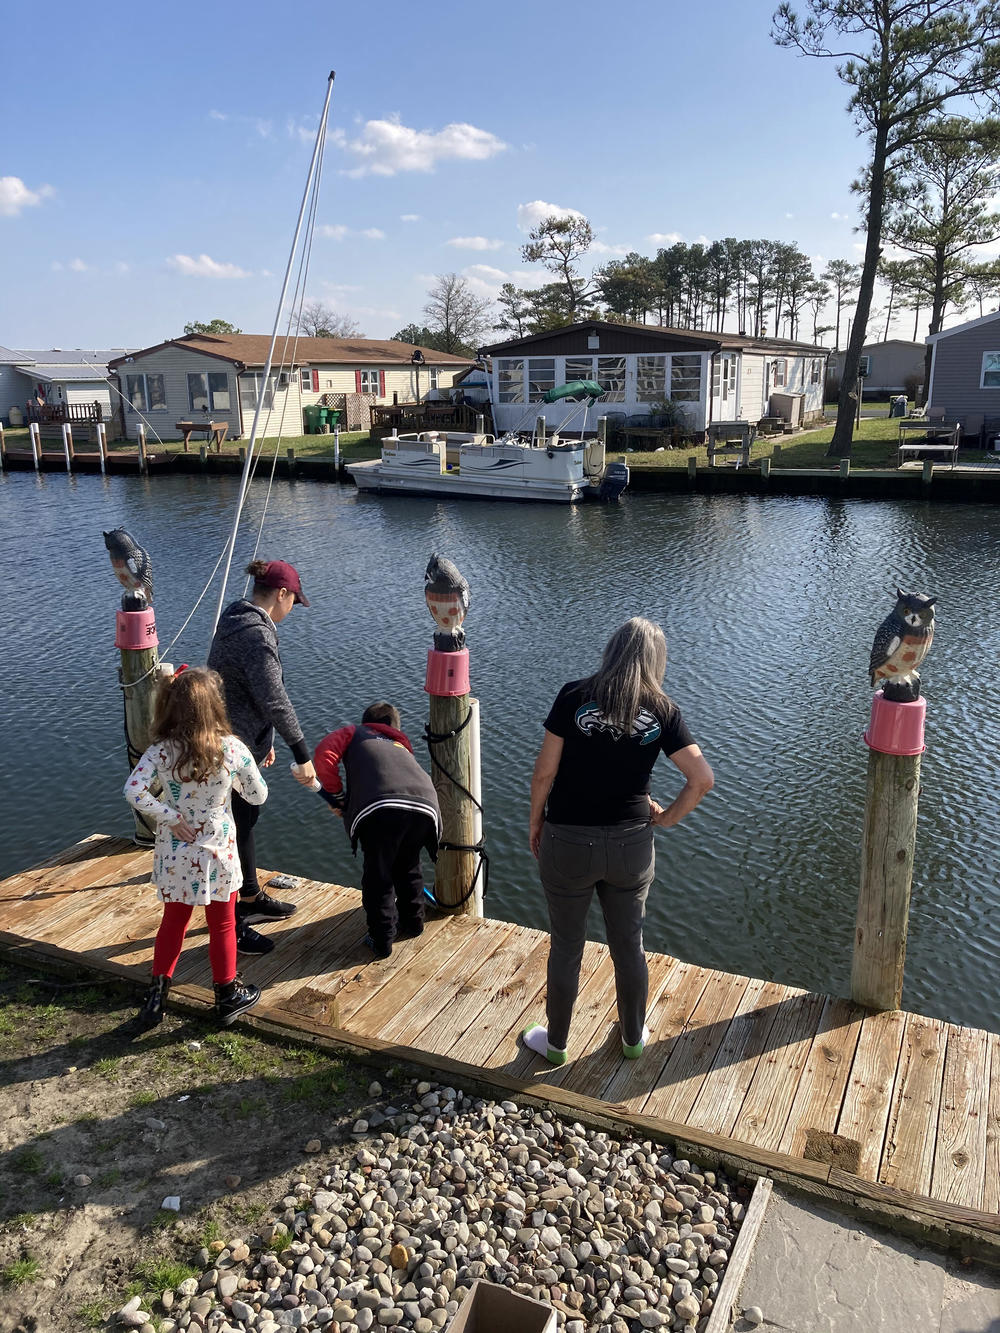 DeFrance on the dock outside her house in the mobile home park, with her daughter-in-law and grandkids.